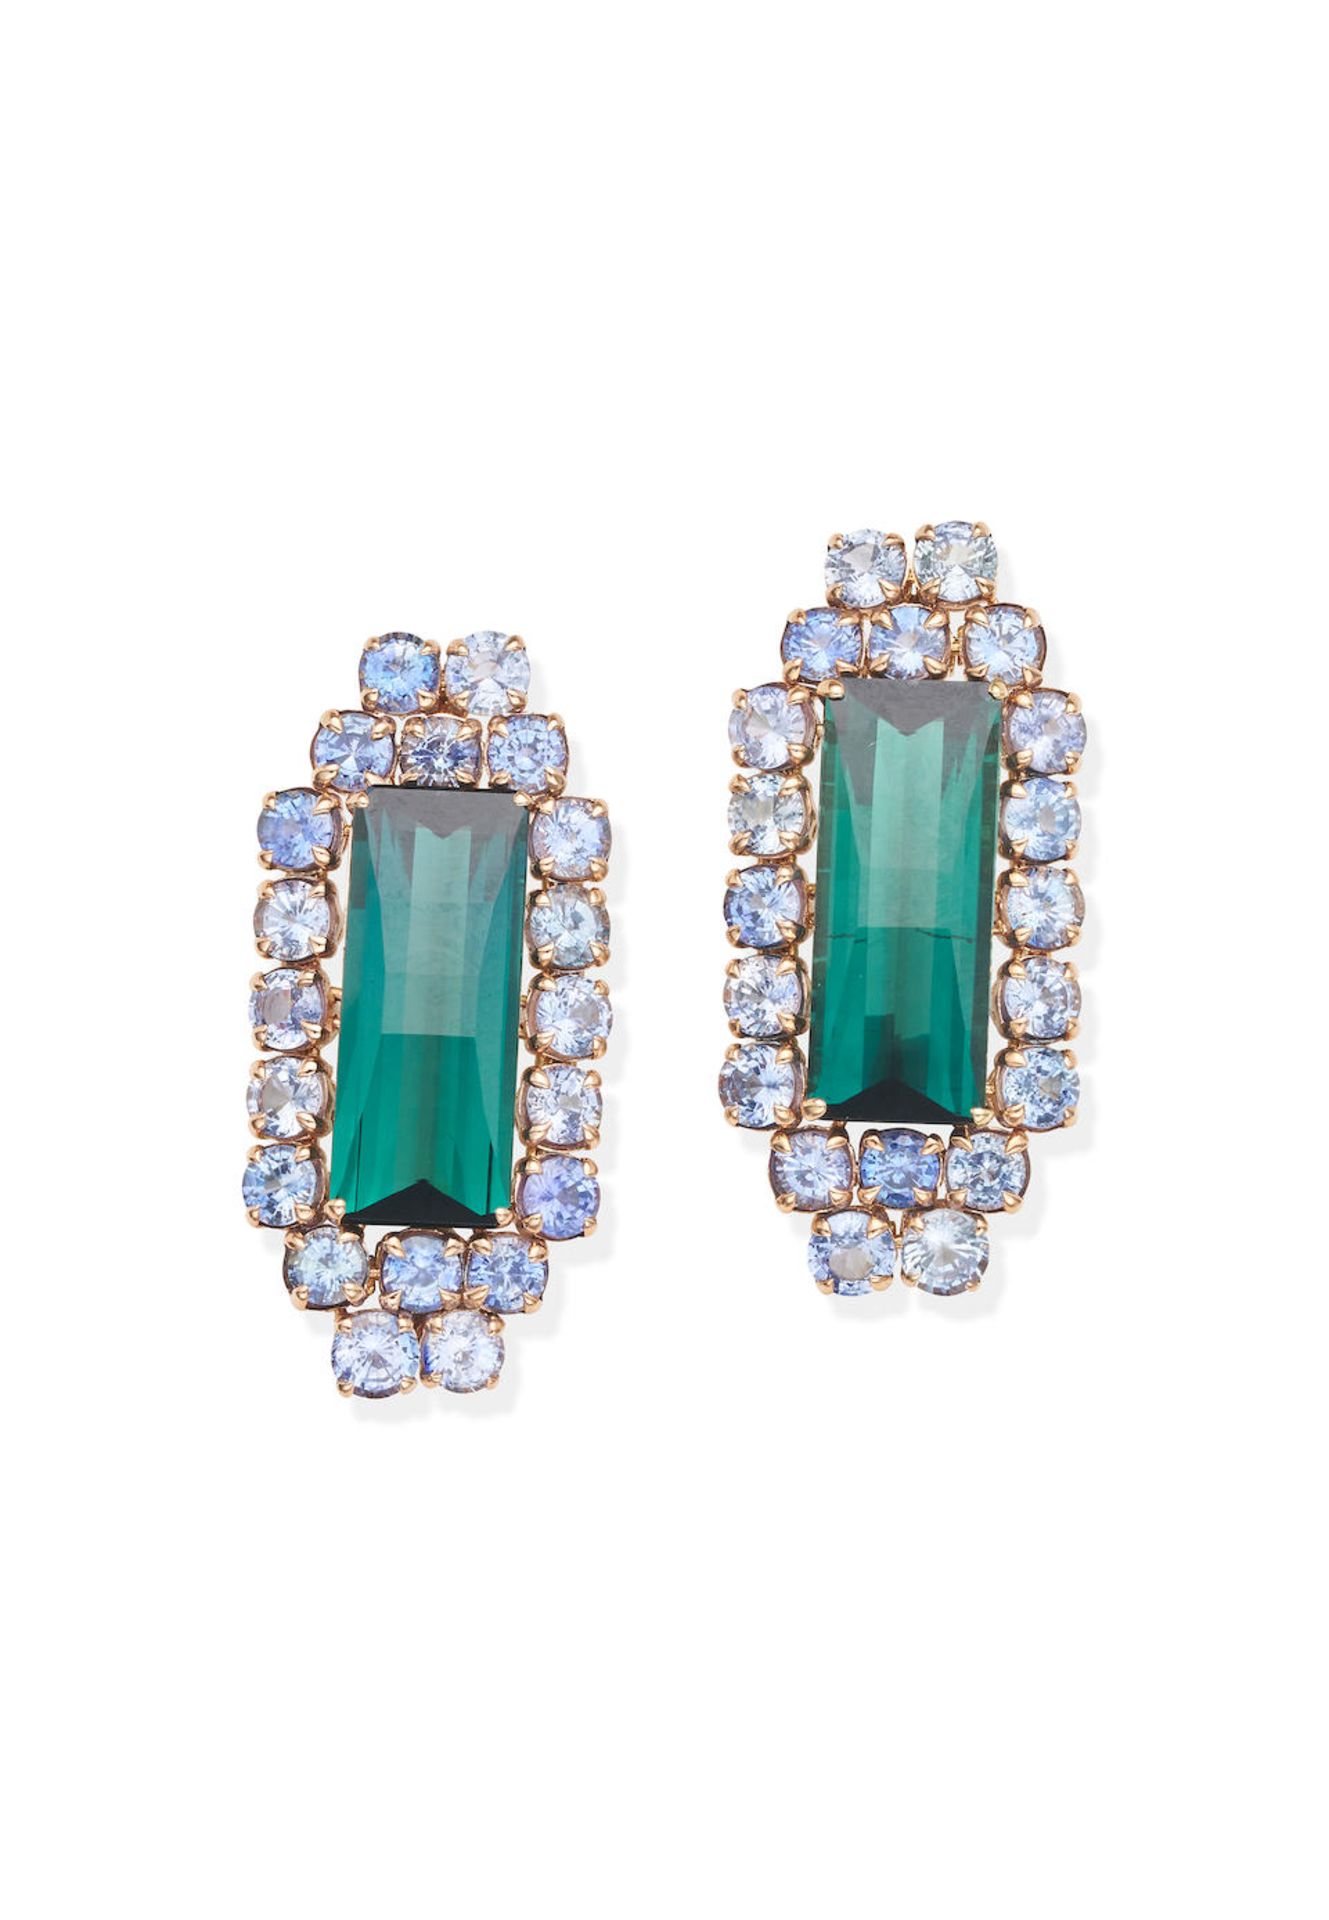 PAOLO COSTAGLI | PAIR OF TOURMALINE AND SAPPHIRE EARRINGS